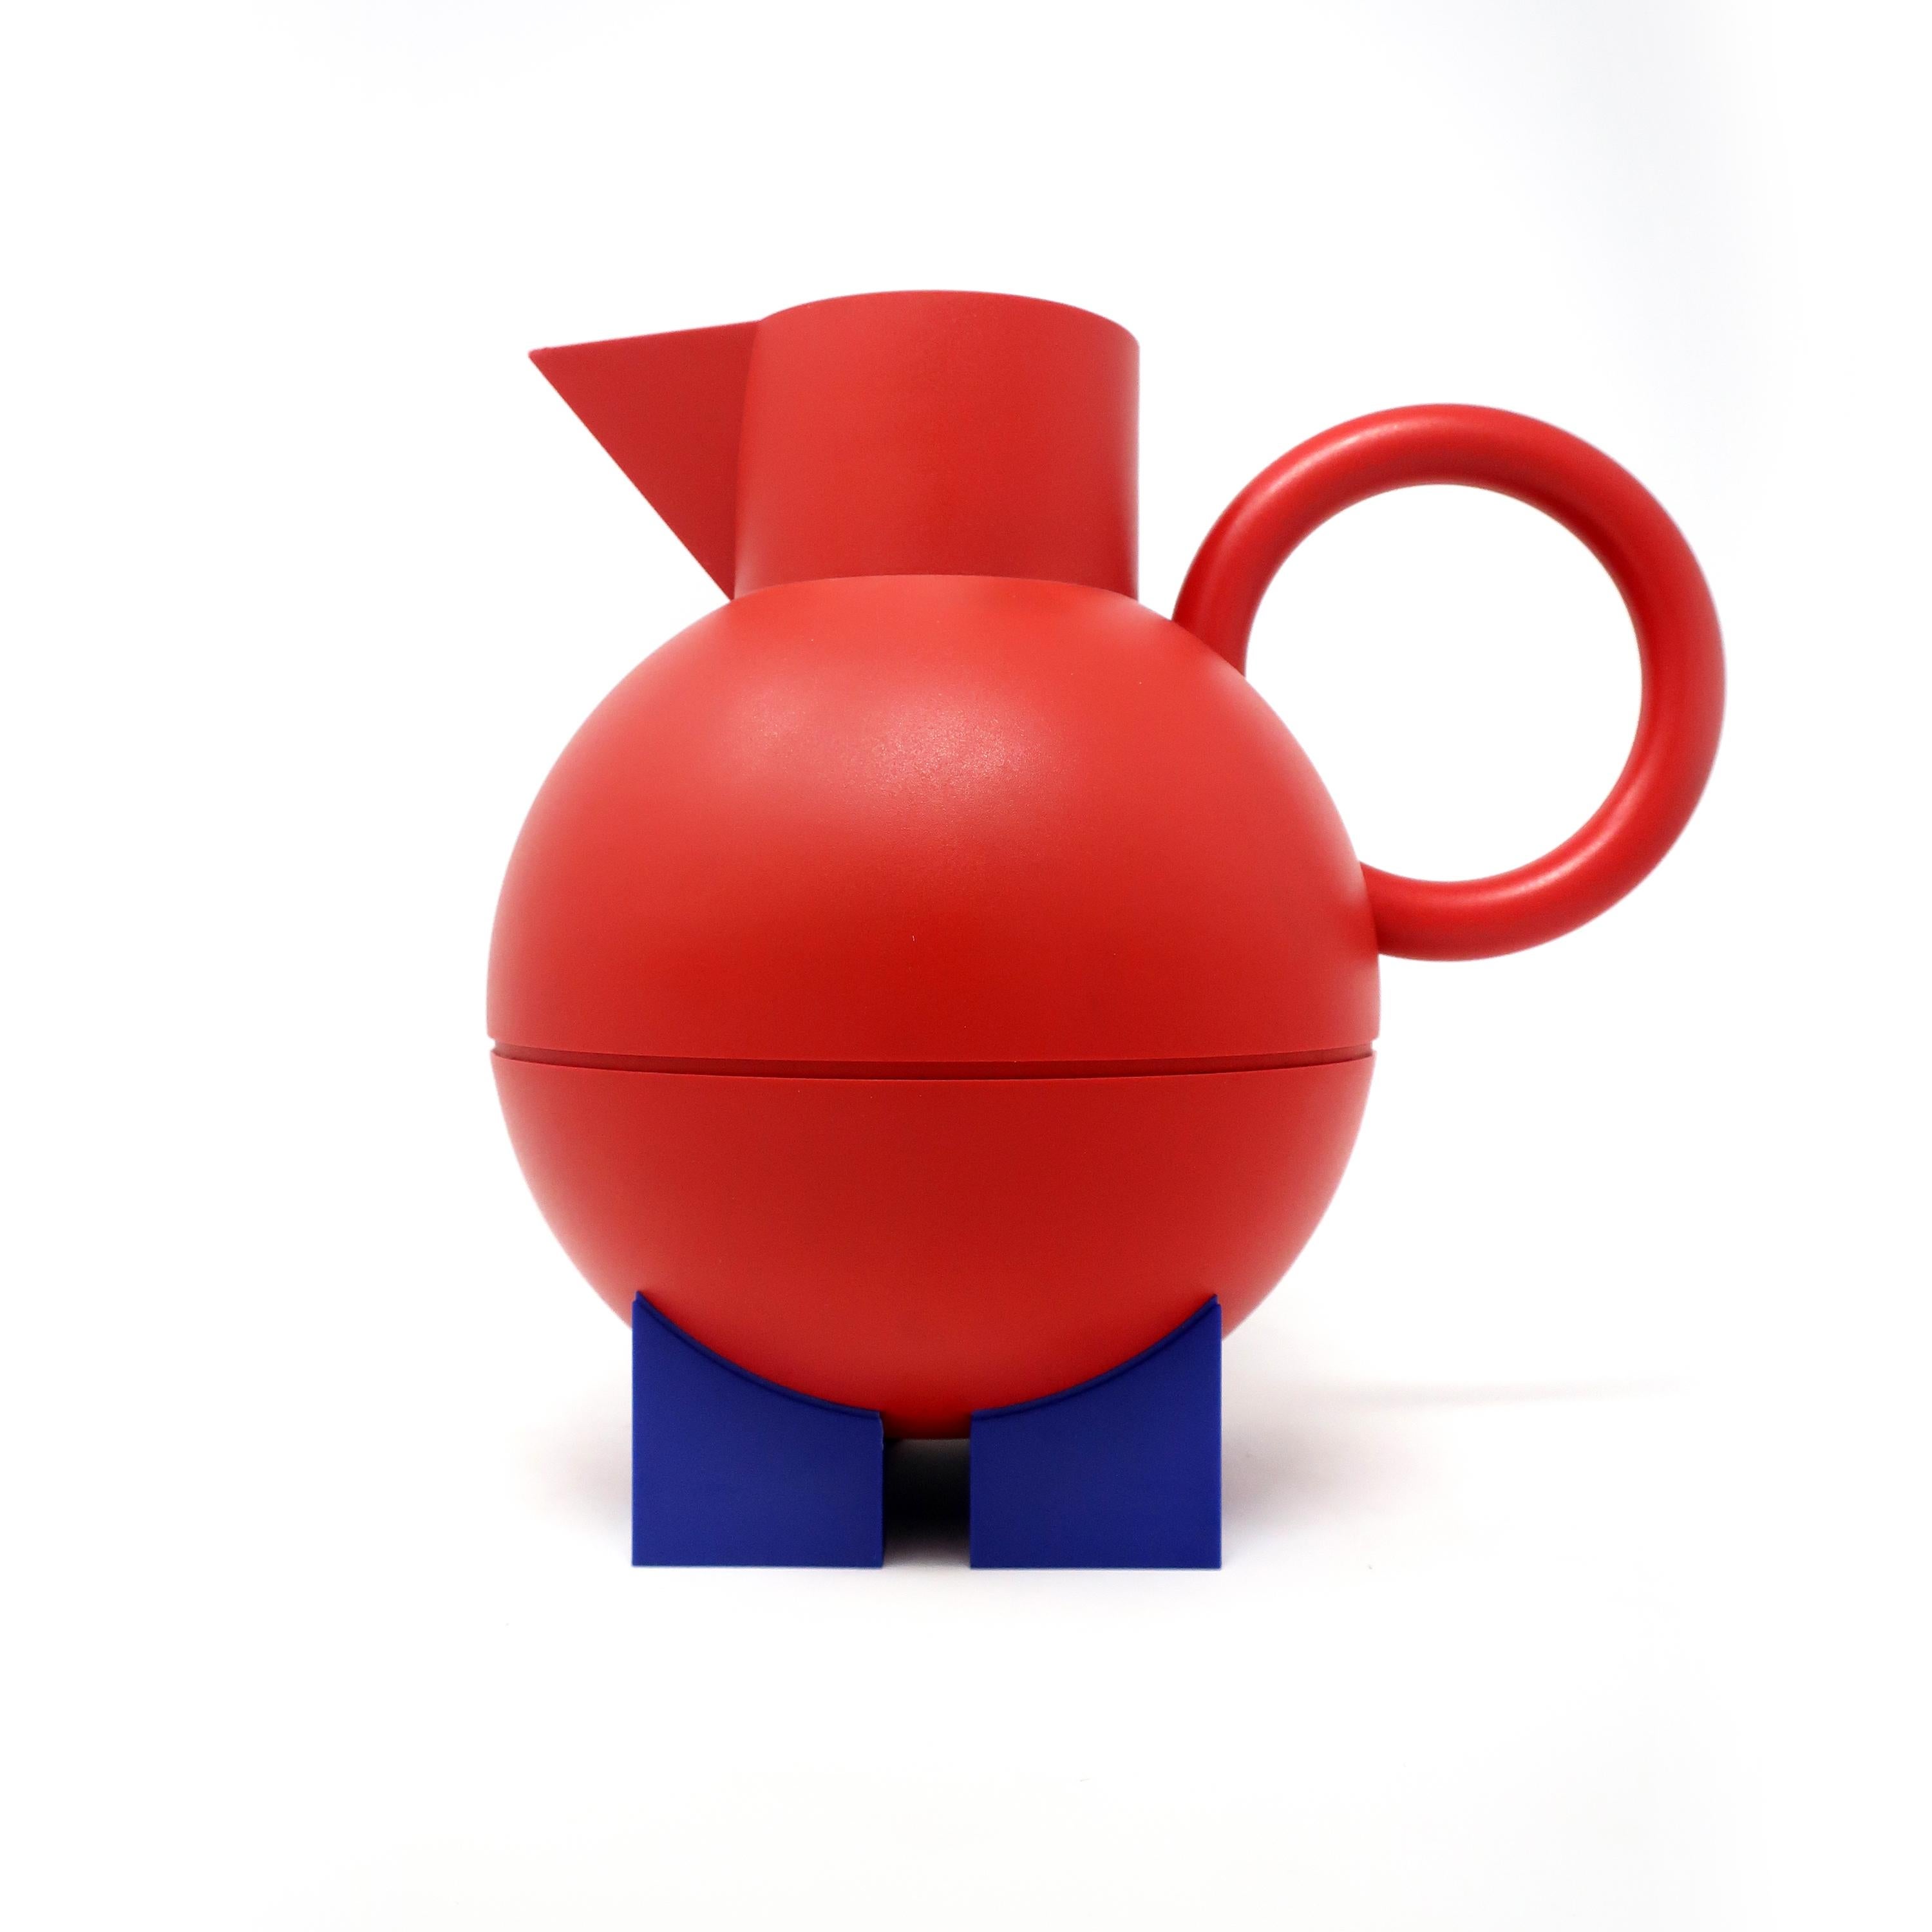 A classic design by Memphis Milano-affiliated American postmodern designer and architect Michael Graves for his Euclid line for Alessi, the Italian home goods powerhouse. A red handle, triangular spout, and rounded body sitting on blue rectangular